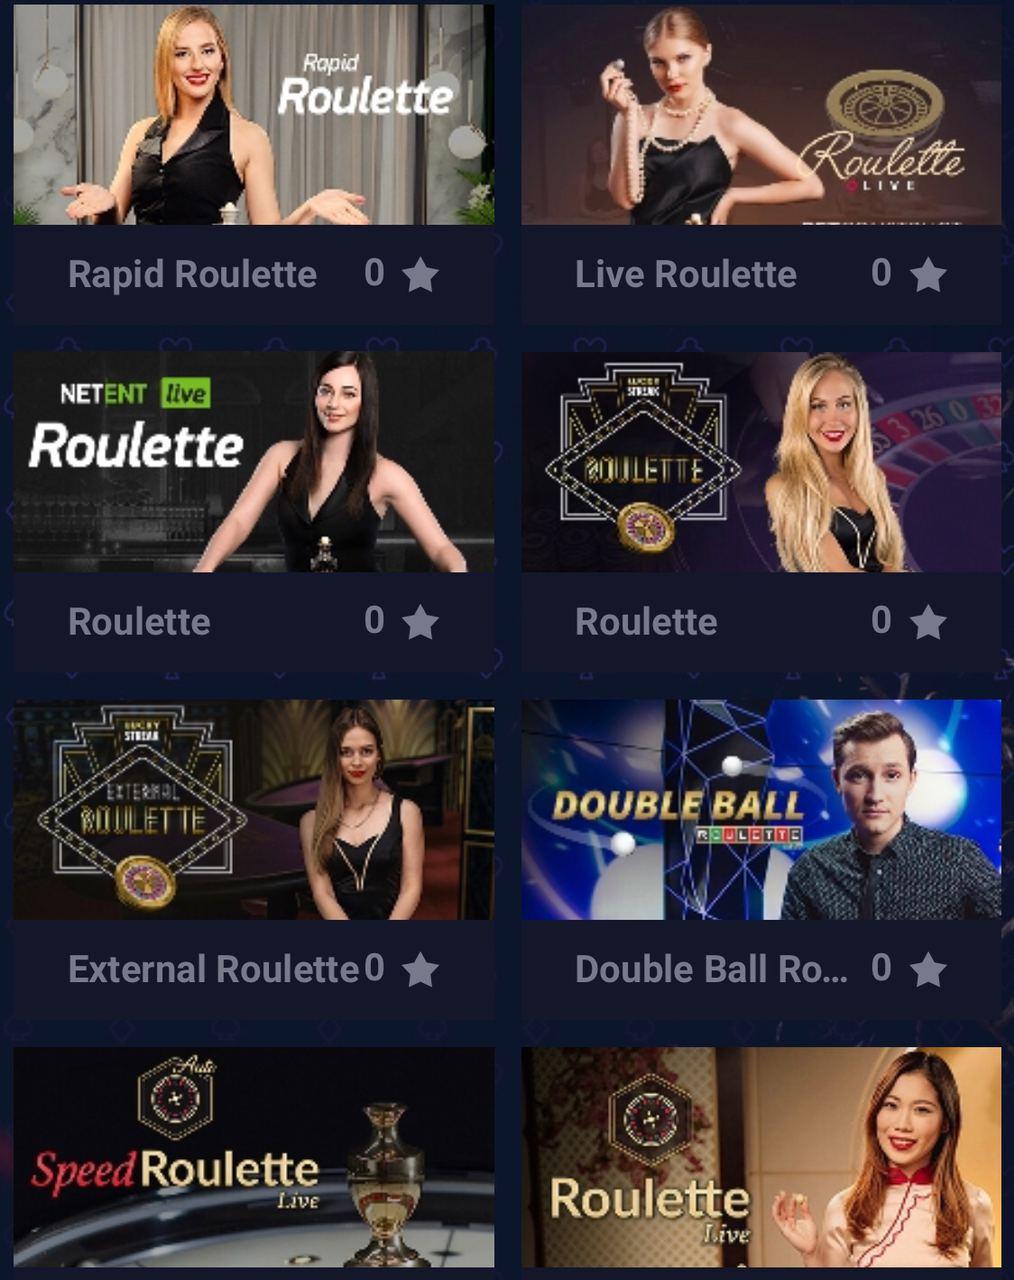 free play live roulette